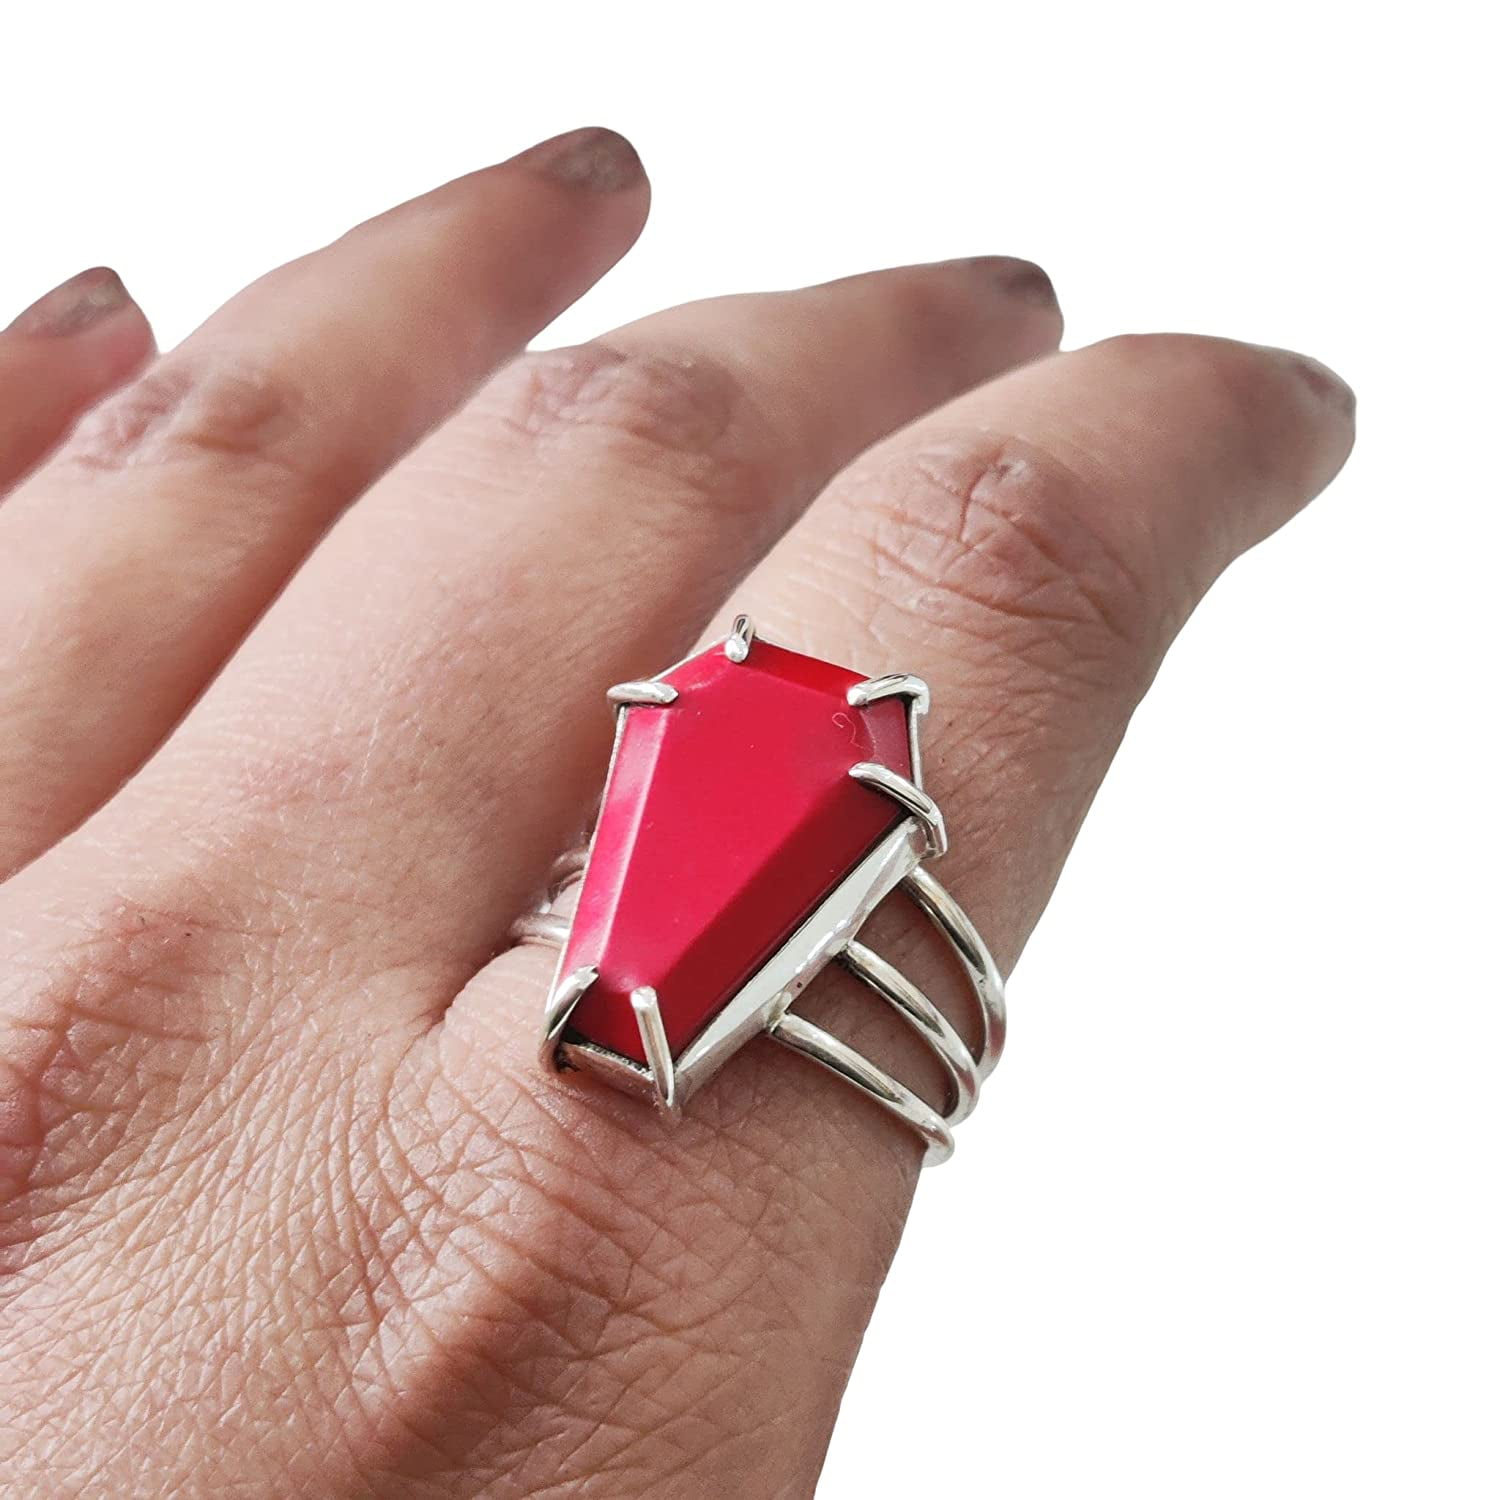 Aries Coral Coffin Ring Natural Red April Birthstone Unisex Womens 925 Sterling Silver Christmas Handmade Statement Jewelry Shape Gemstone Ring 627e77bf e6e0 45c9 9220 d30fc16cf402.b1eef98a2d1a6757993d0e91742a1720